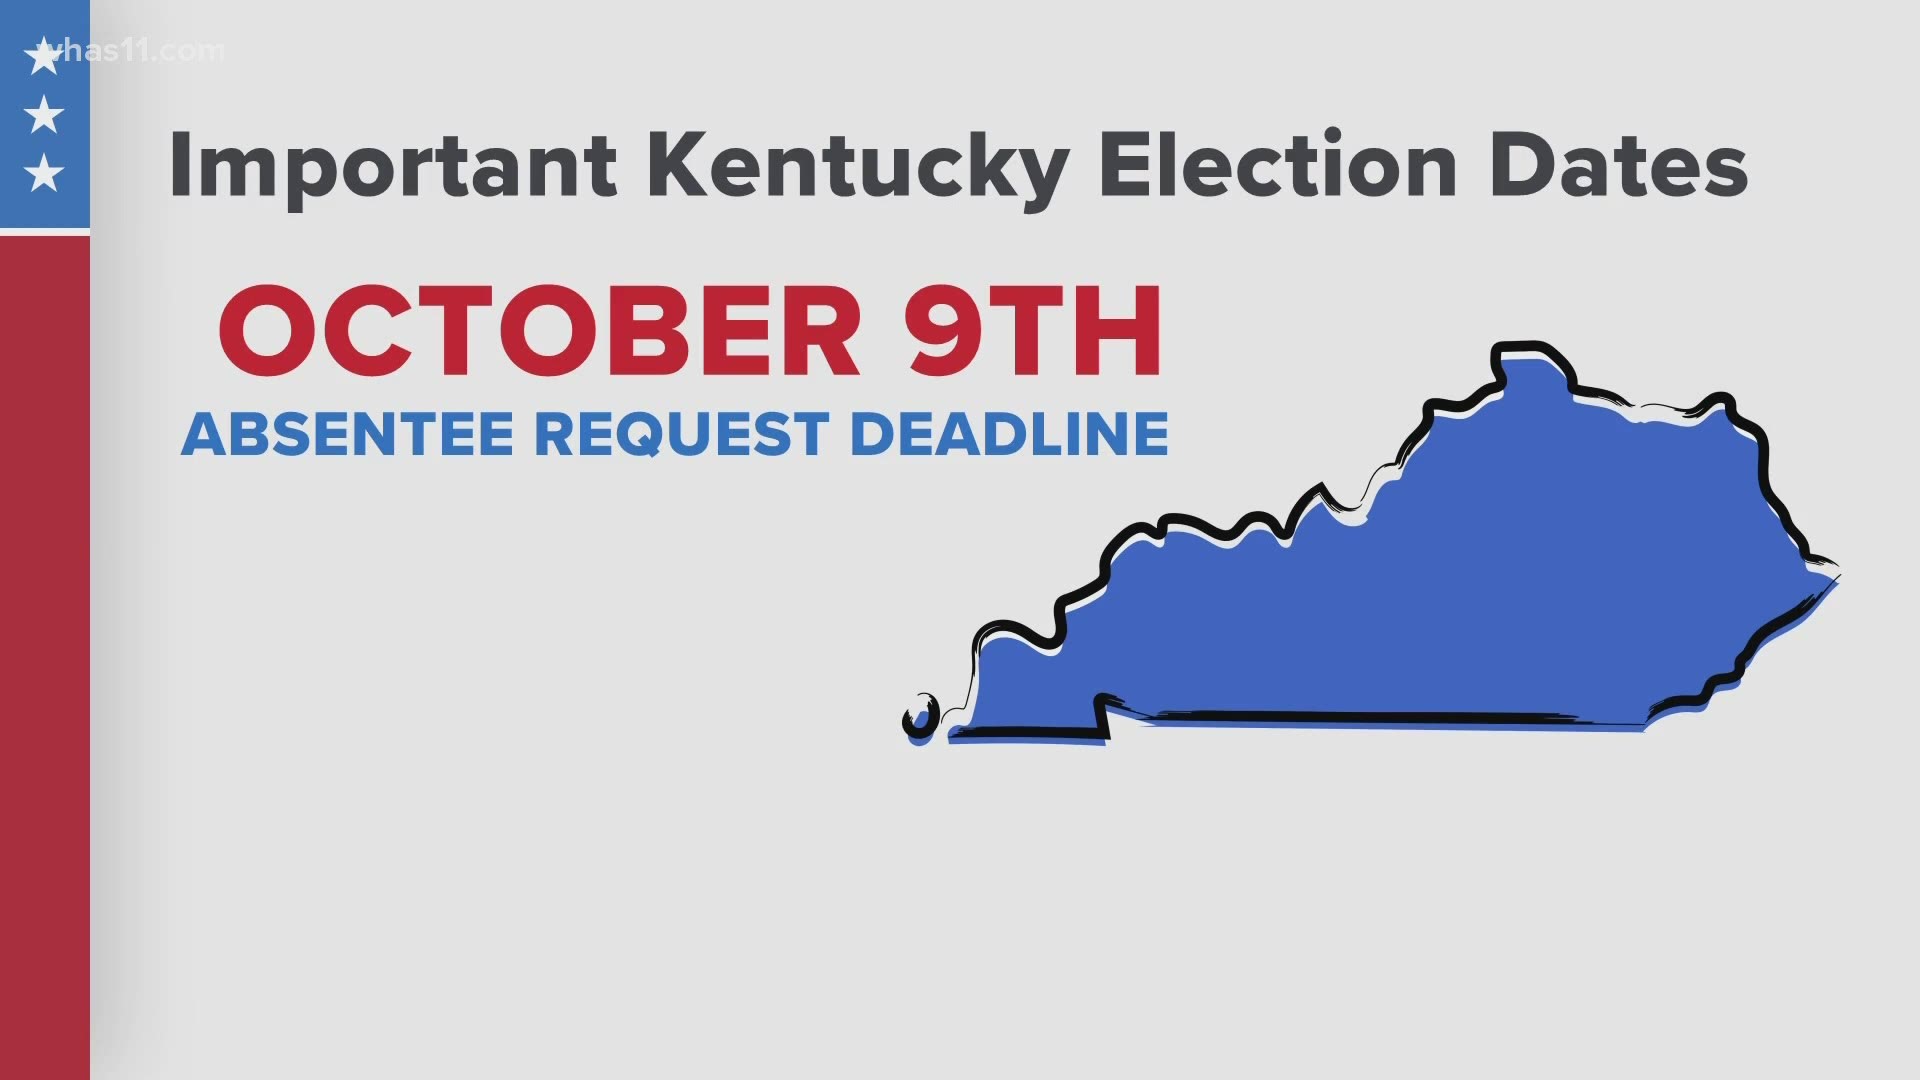 Since many elderly Kentuckians lack technology skills or lack access to the internet, officials say they can request an absentee ballot over the phone.